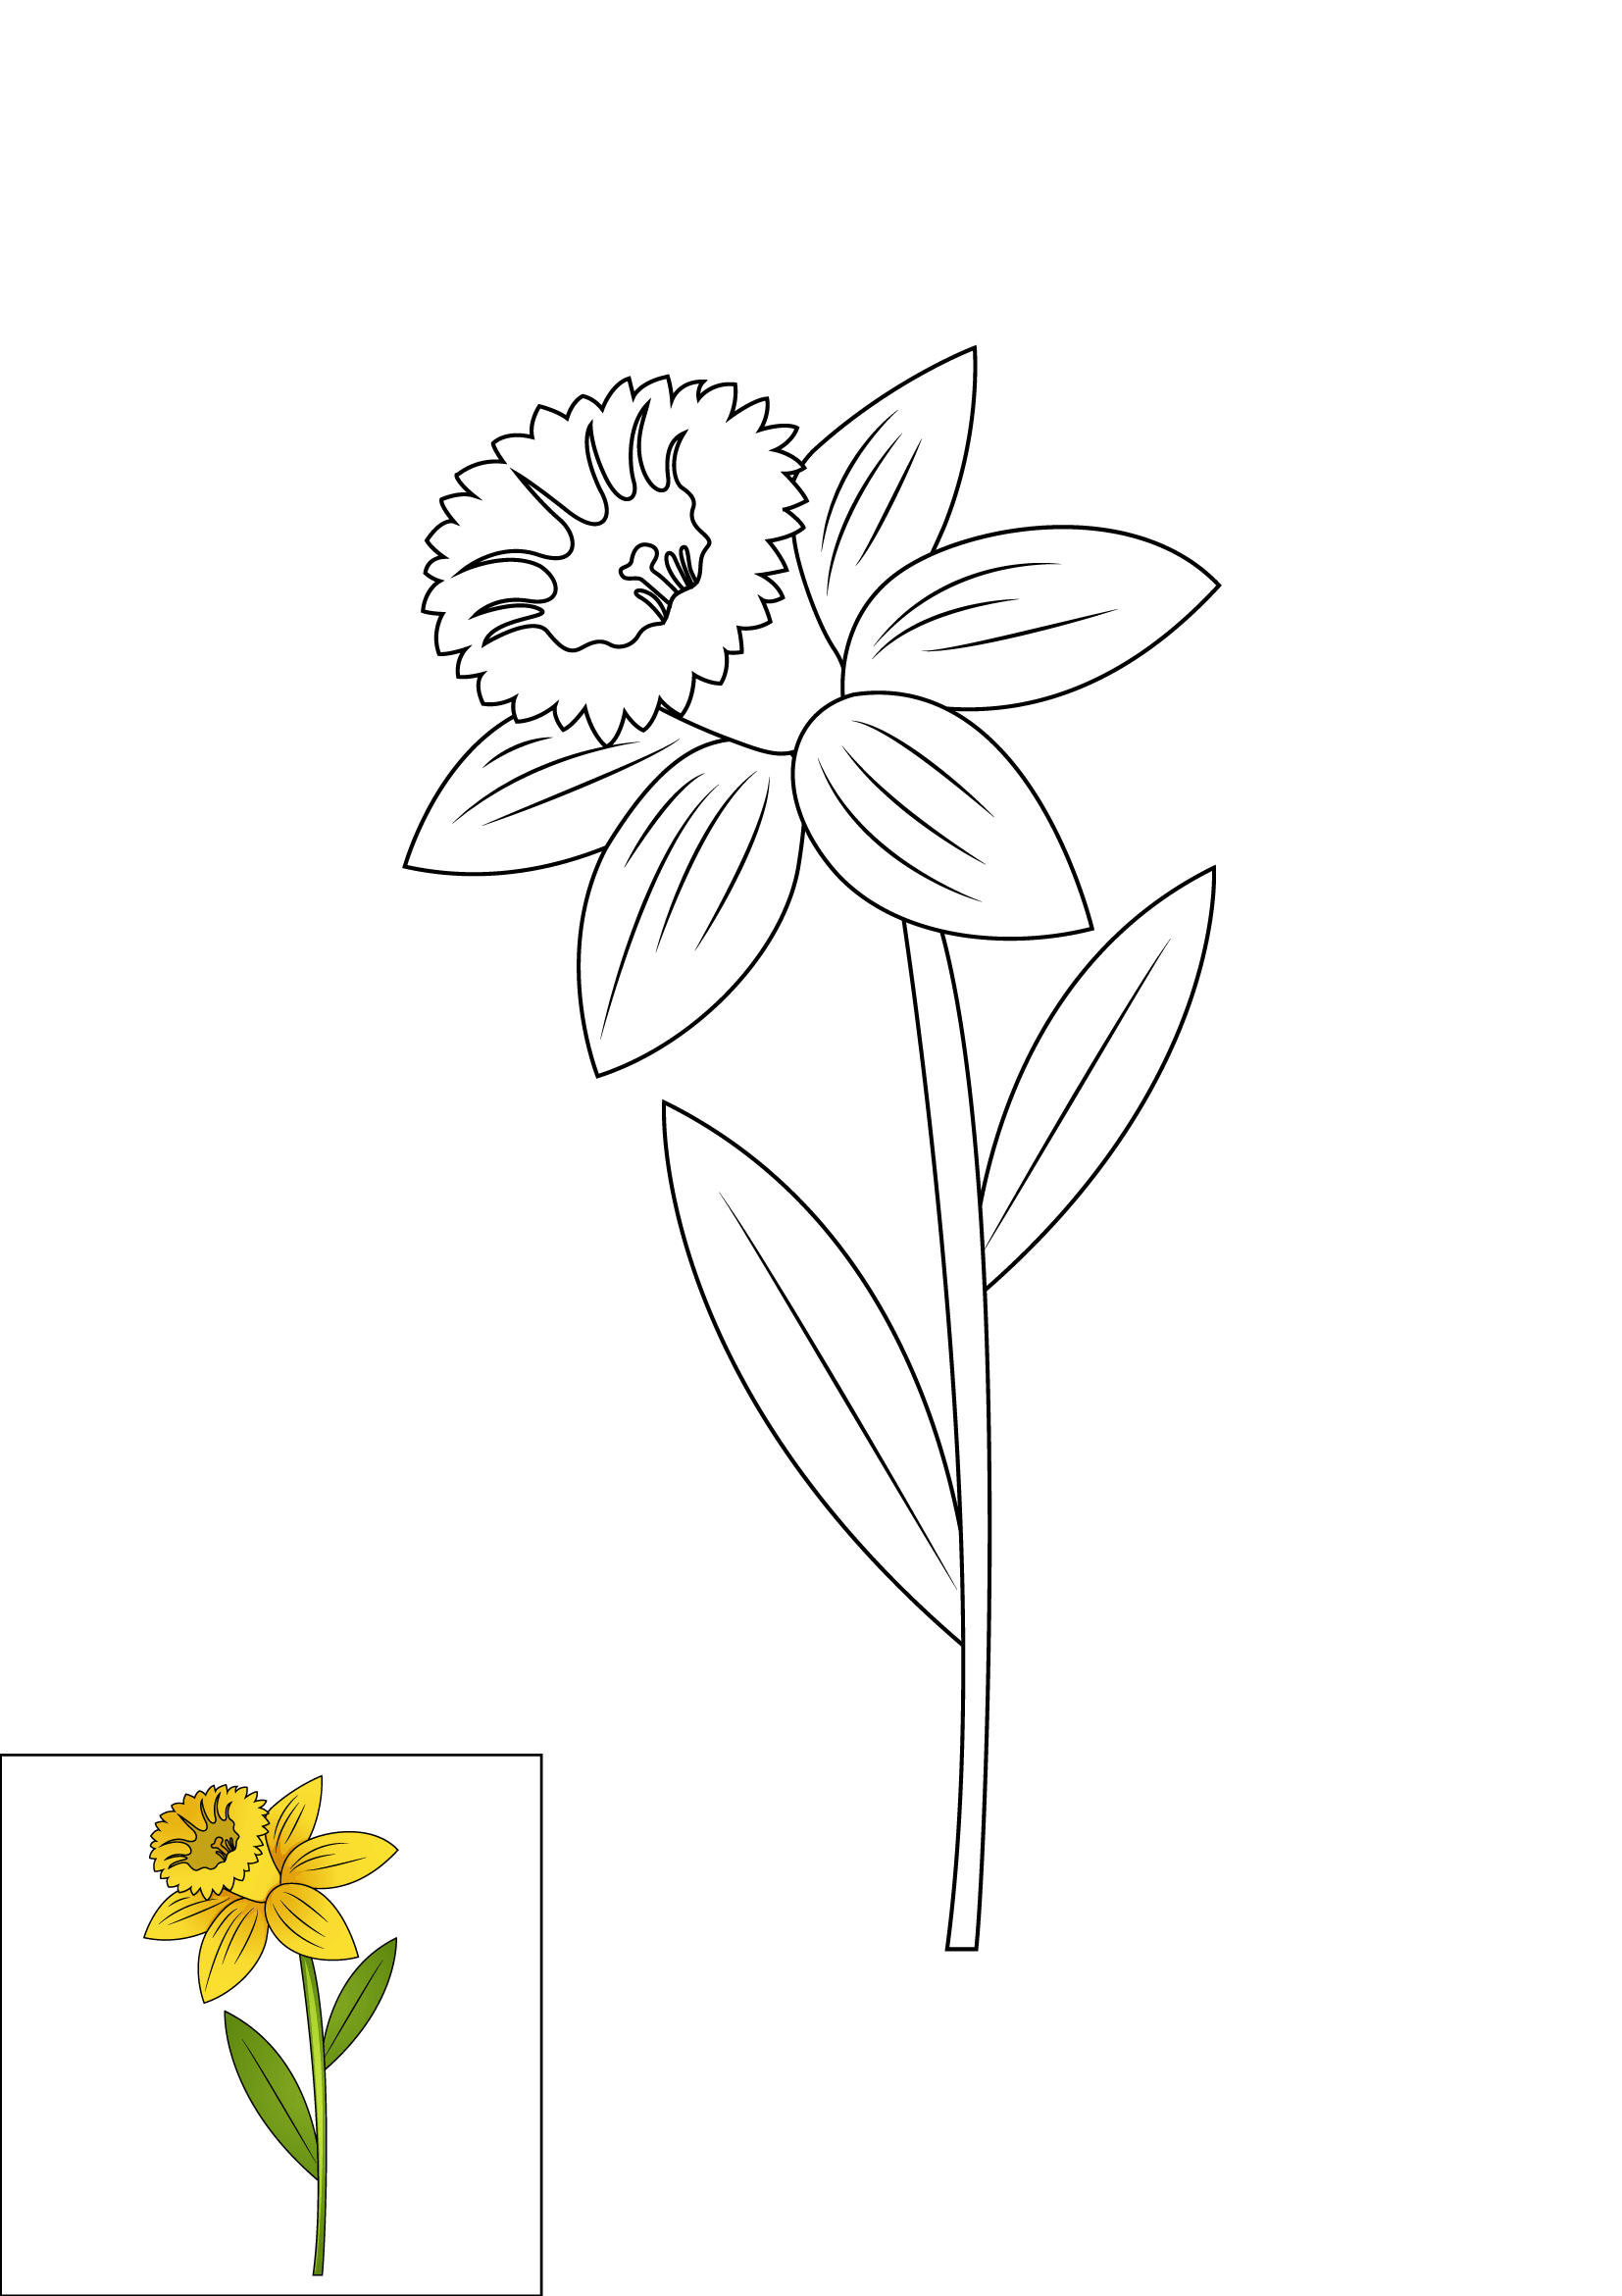 How to Draw A Daffodil Step by Step Printable Color